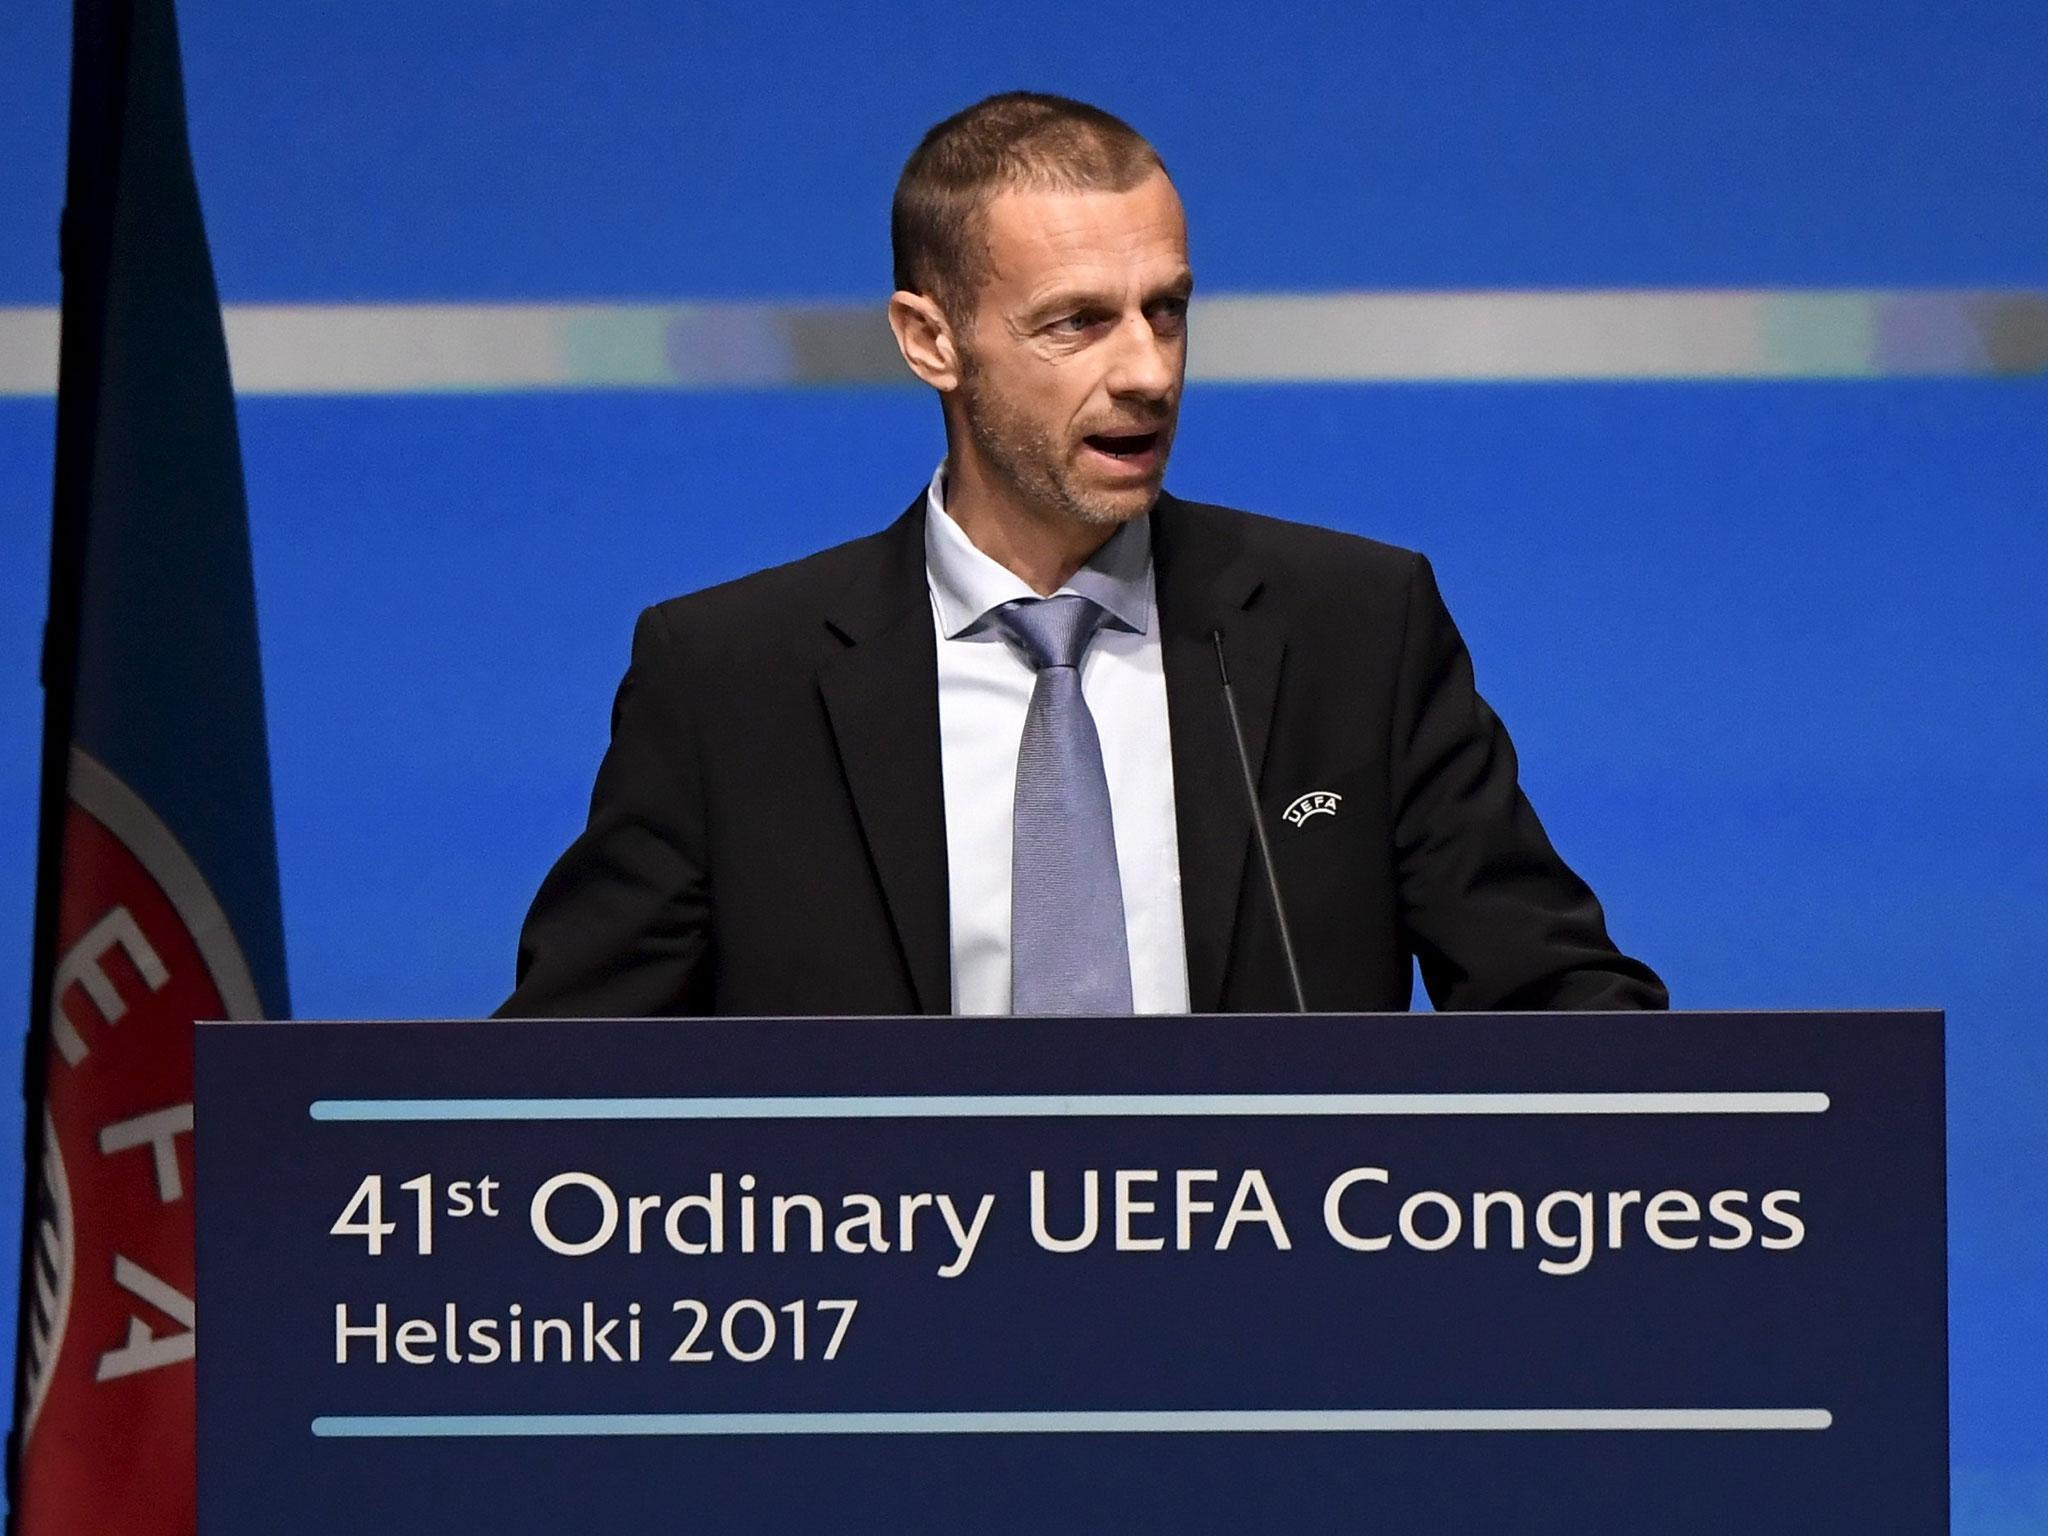 Uefa president Aleksander Ceferin has expressed his sadness at the Manchester Arena attack